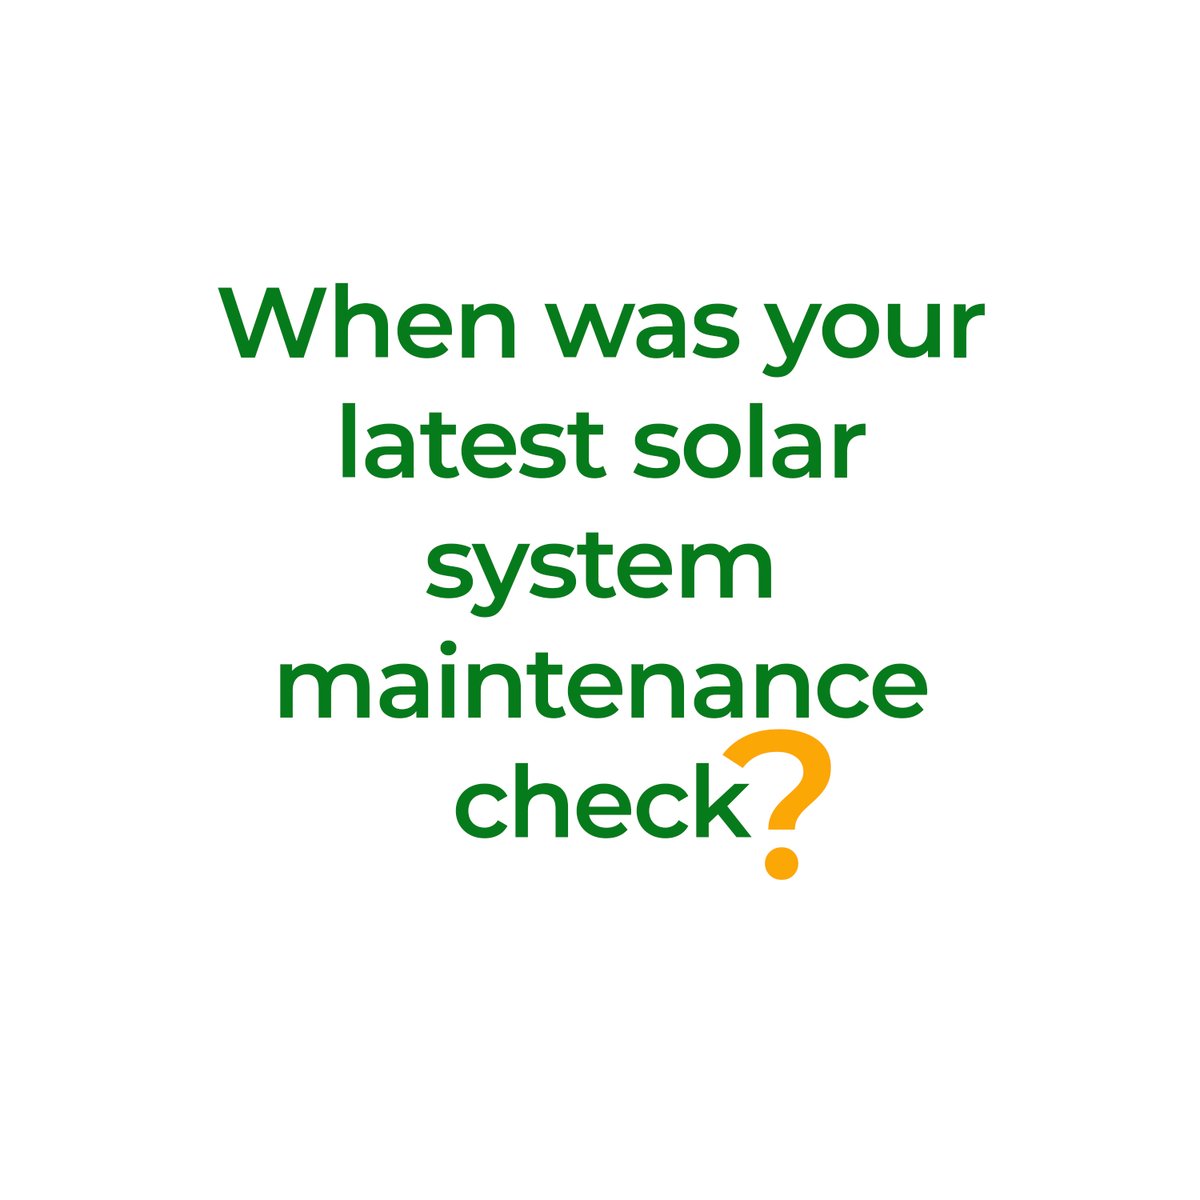 ☀️ It's crucial to ensure everything's running smoothly and efficiently.

#NexgenEnergy #Techfine #CleanEnergy #SolarMaintenance